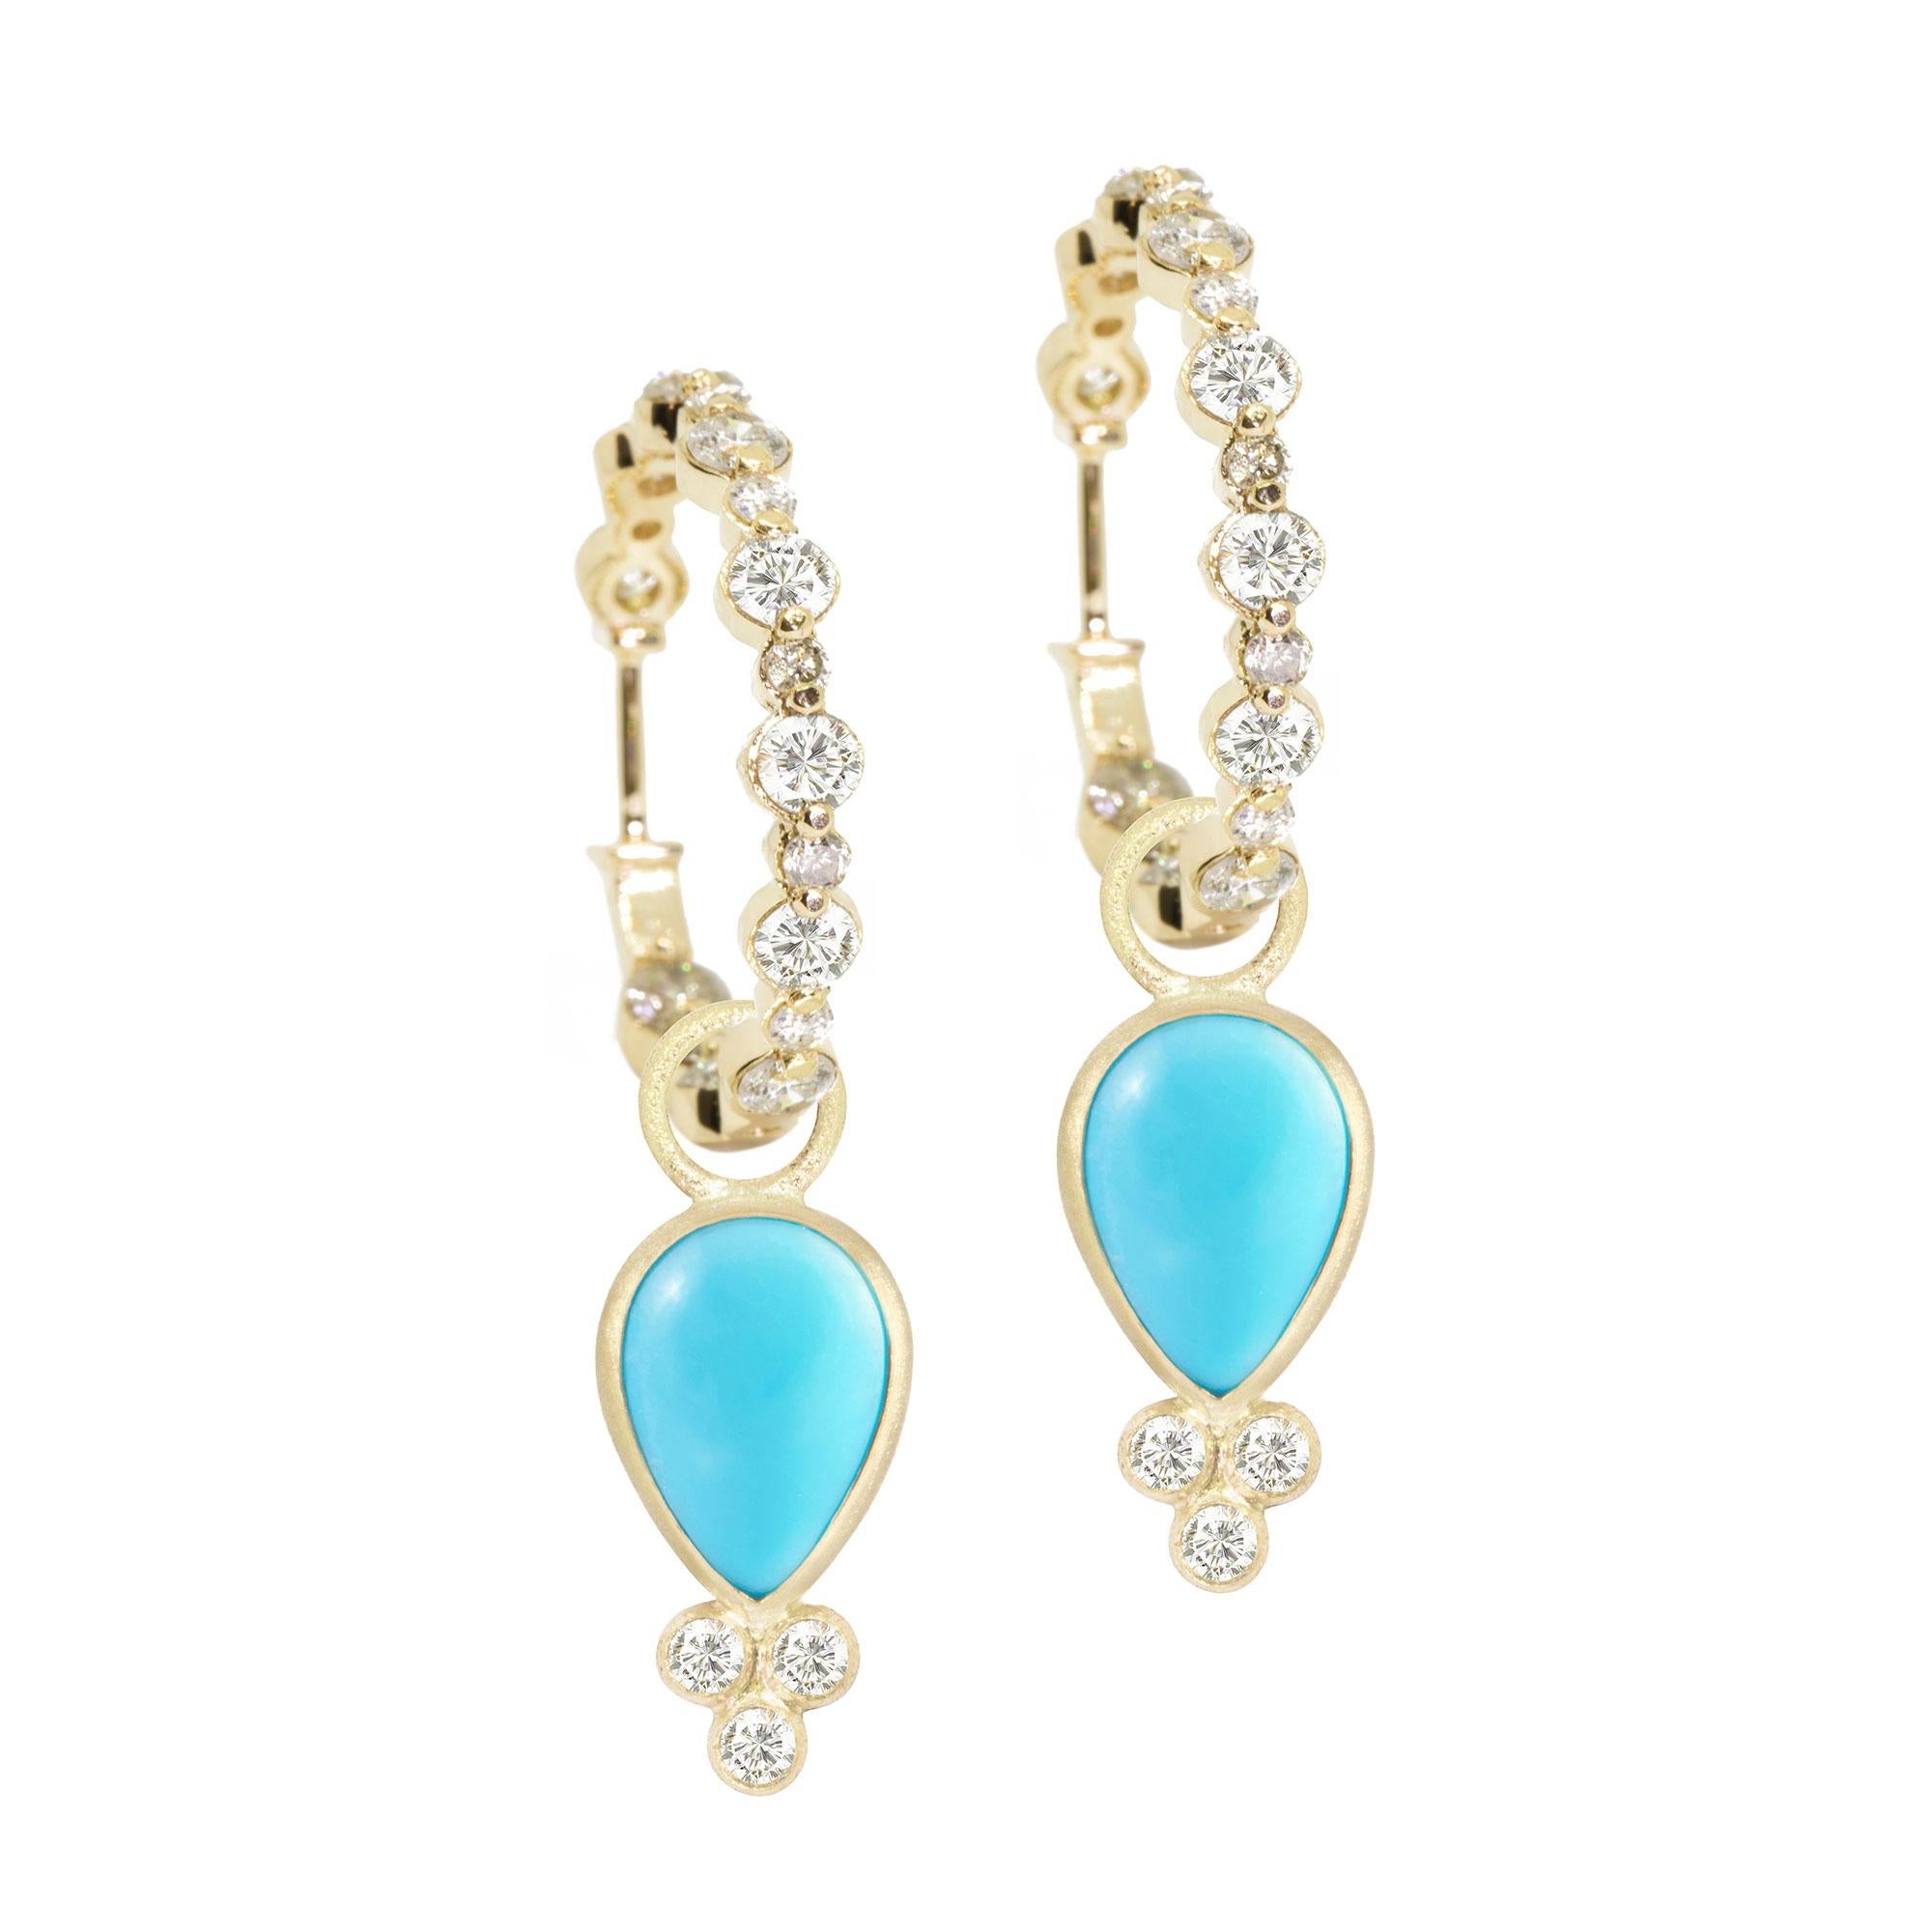 Designed with bezel-set sleeping beauty turquoise stones, the diamond-accented Lilly Gold Charms embrace the shape of a drop of water—an essential element for life—and bring a little edge to any of our hoop styles.
Nina Nguyen Design's